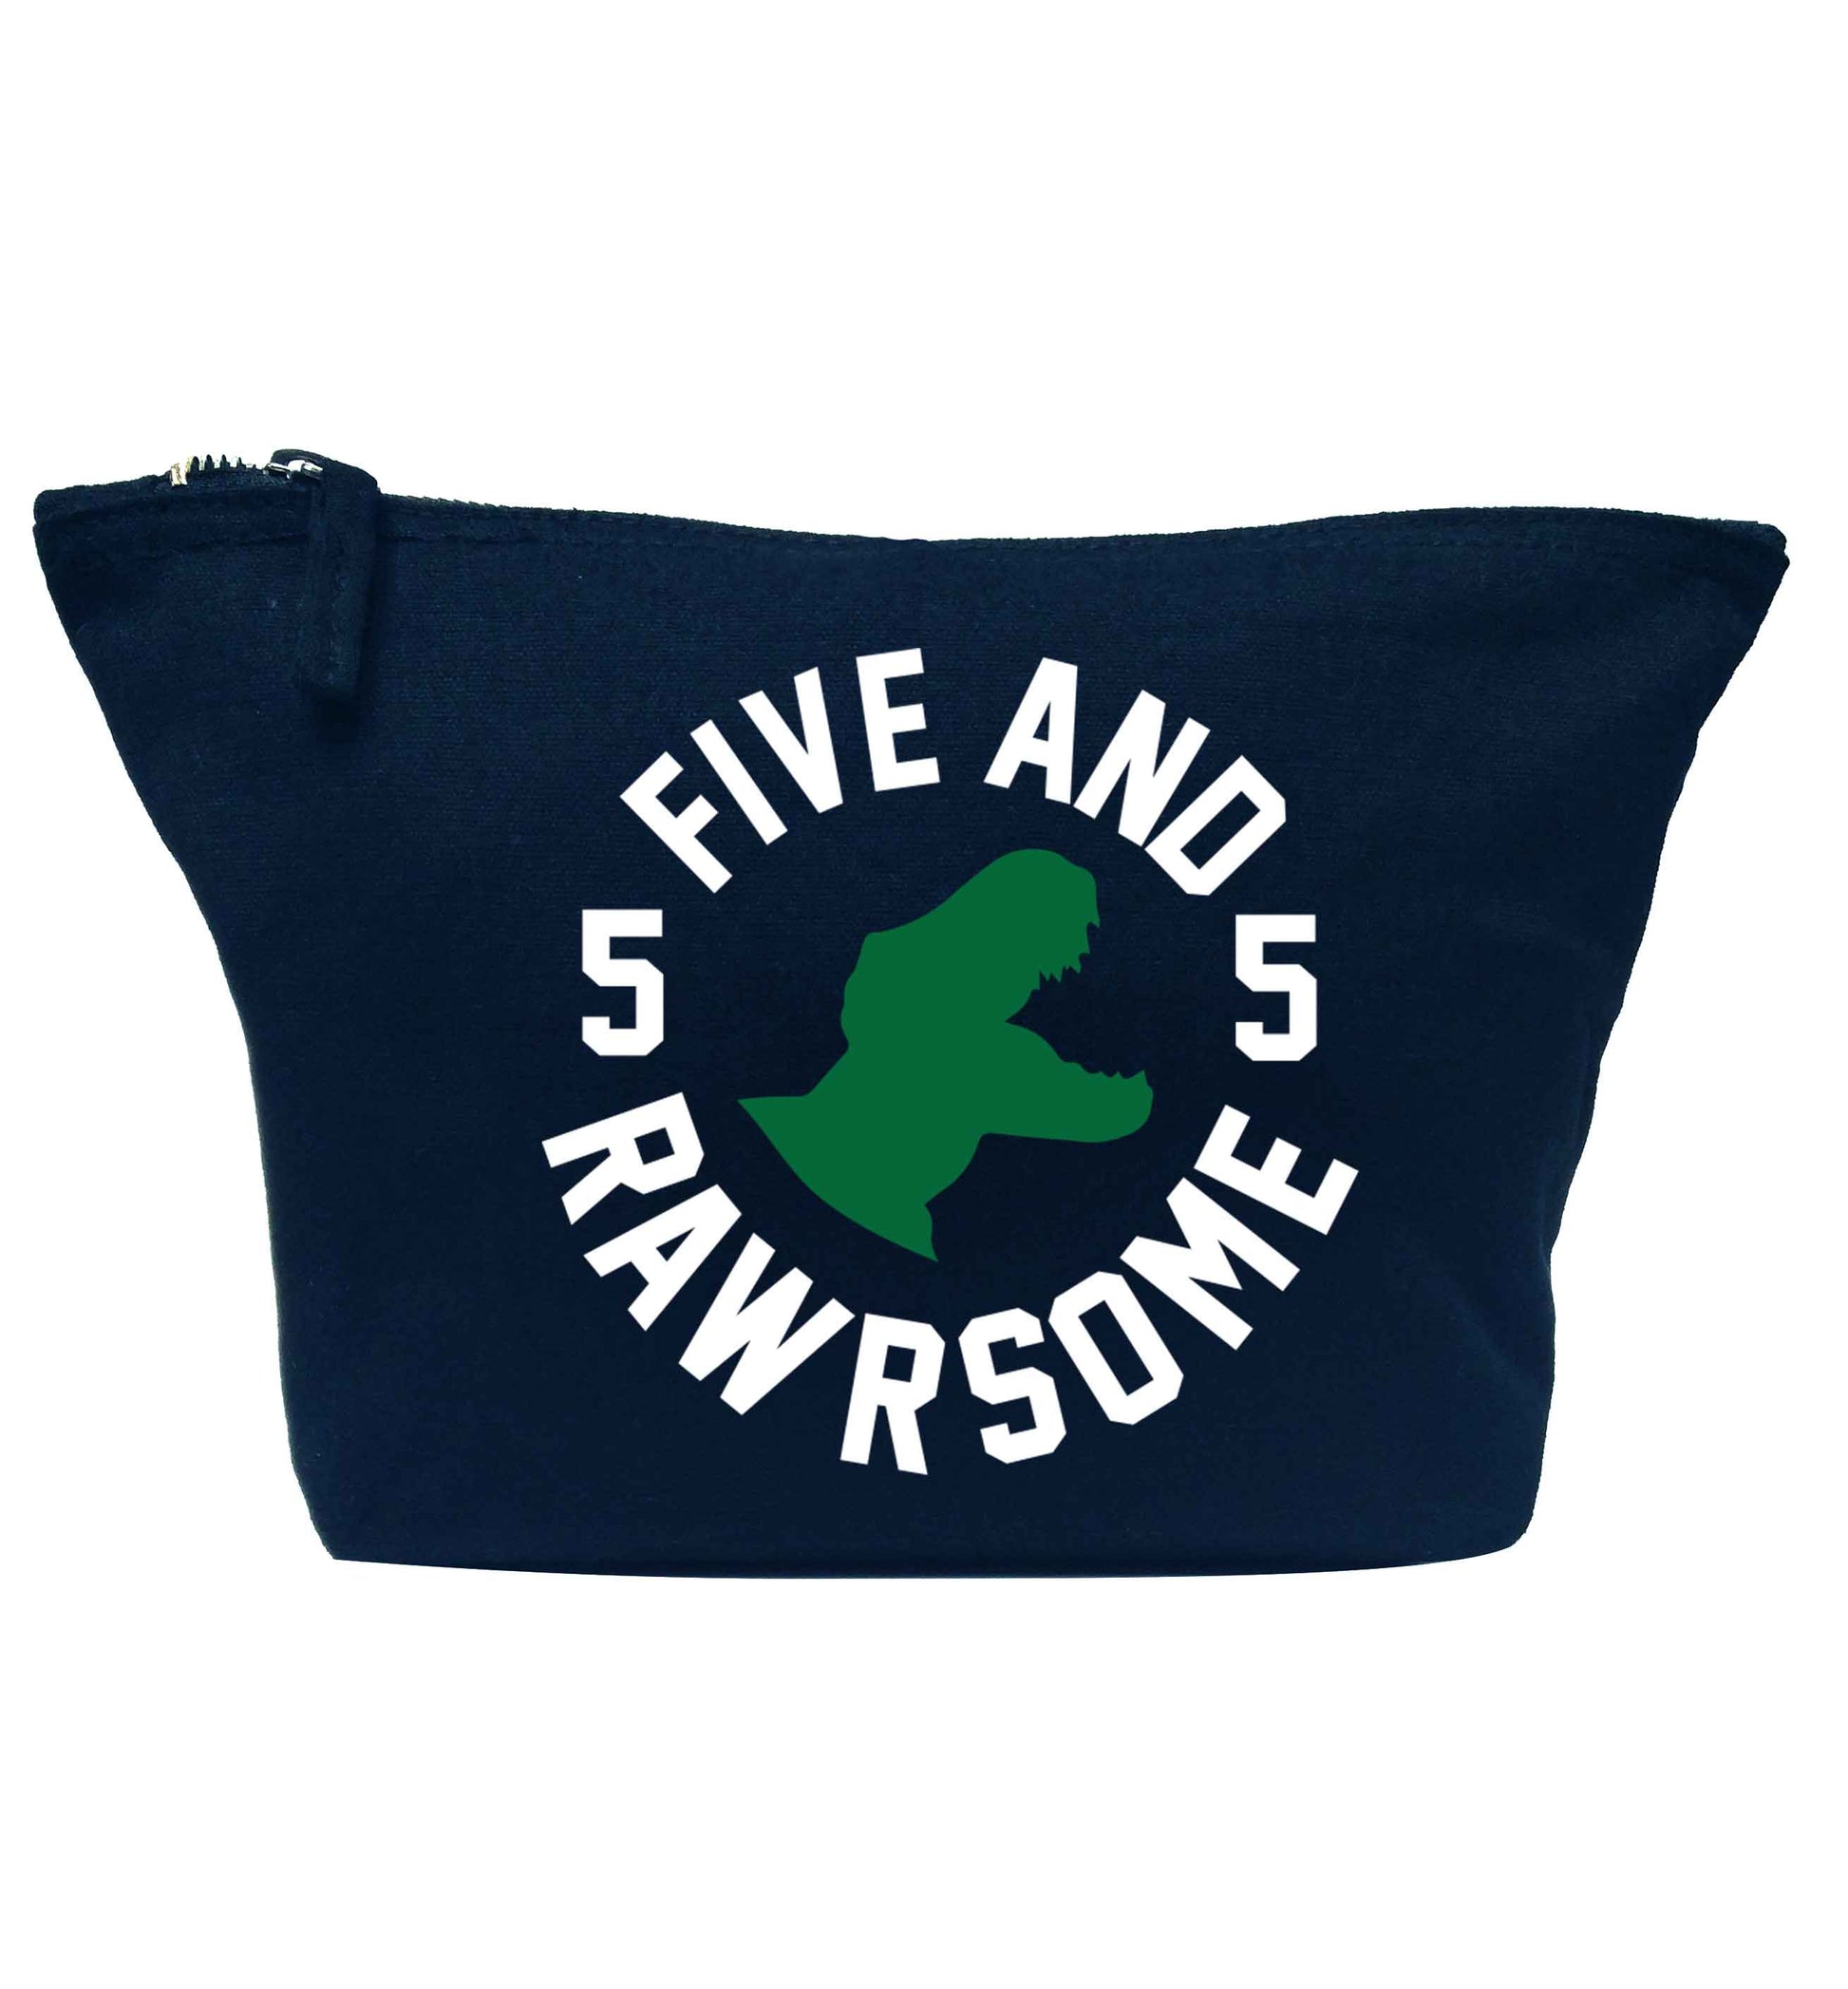 Five and rawrsome navy makeup bag